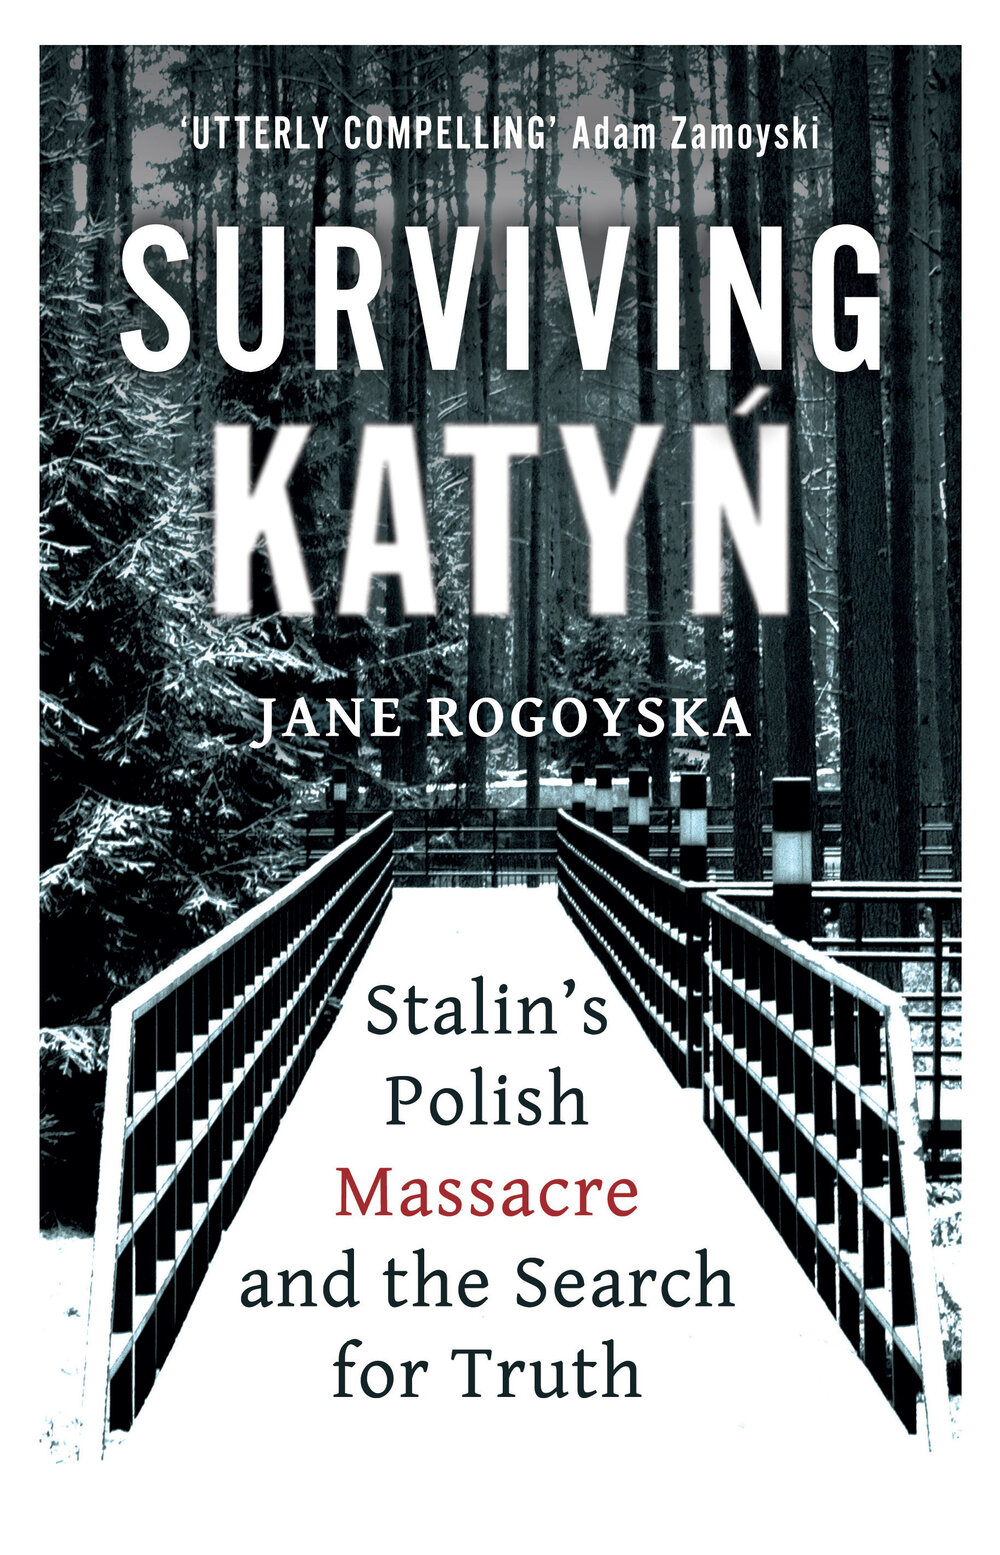 The Katyn Massacre 1940 (Podcast) | Travels Through Time